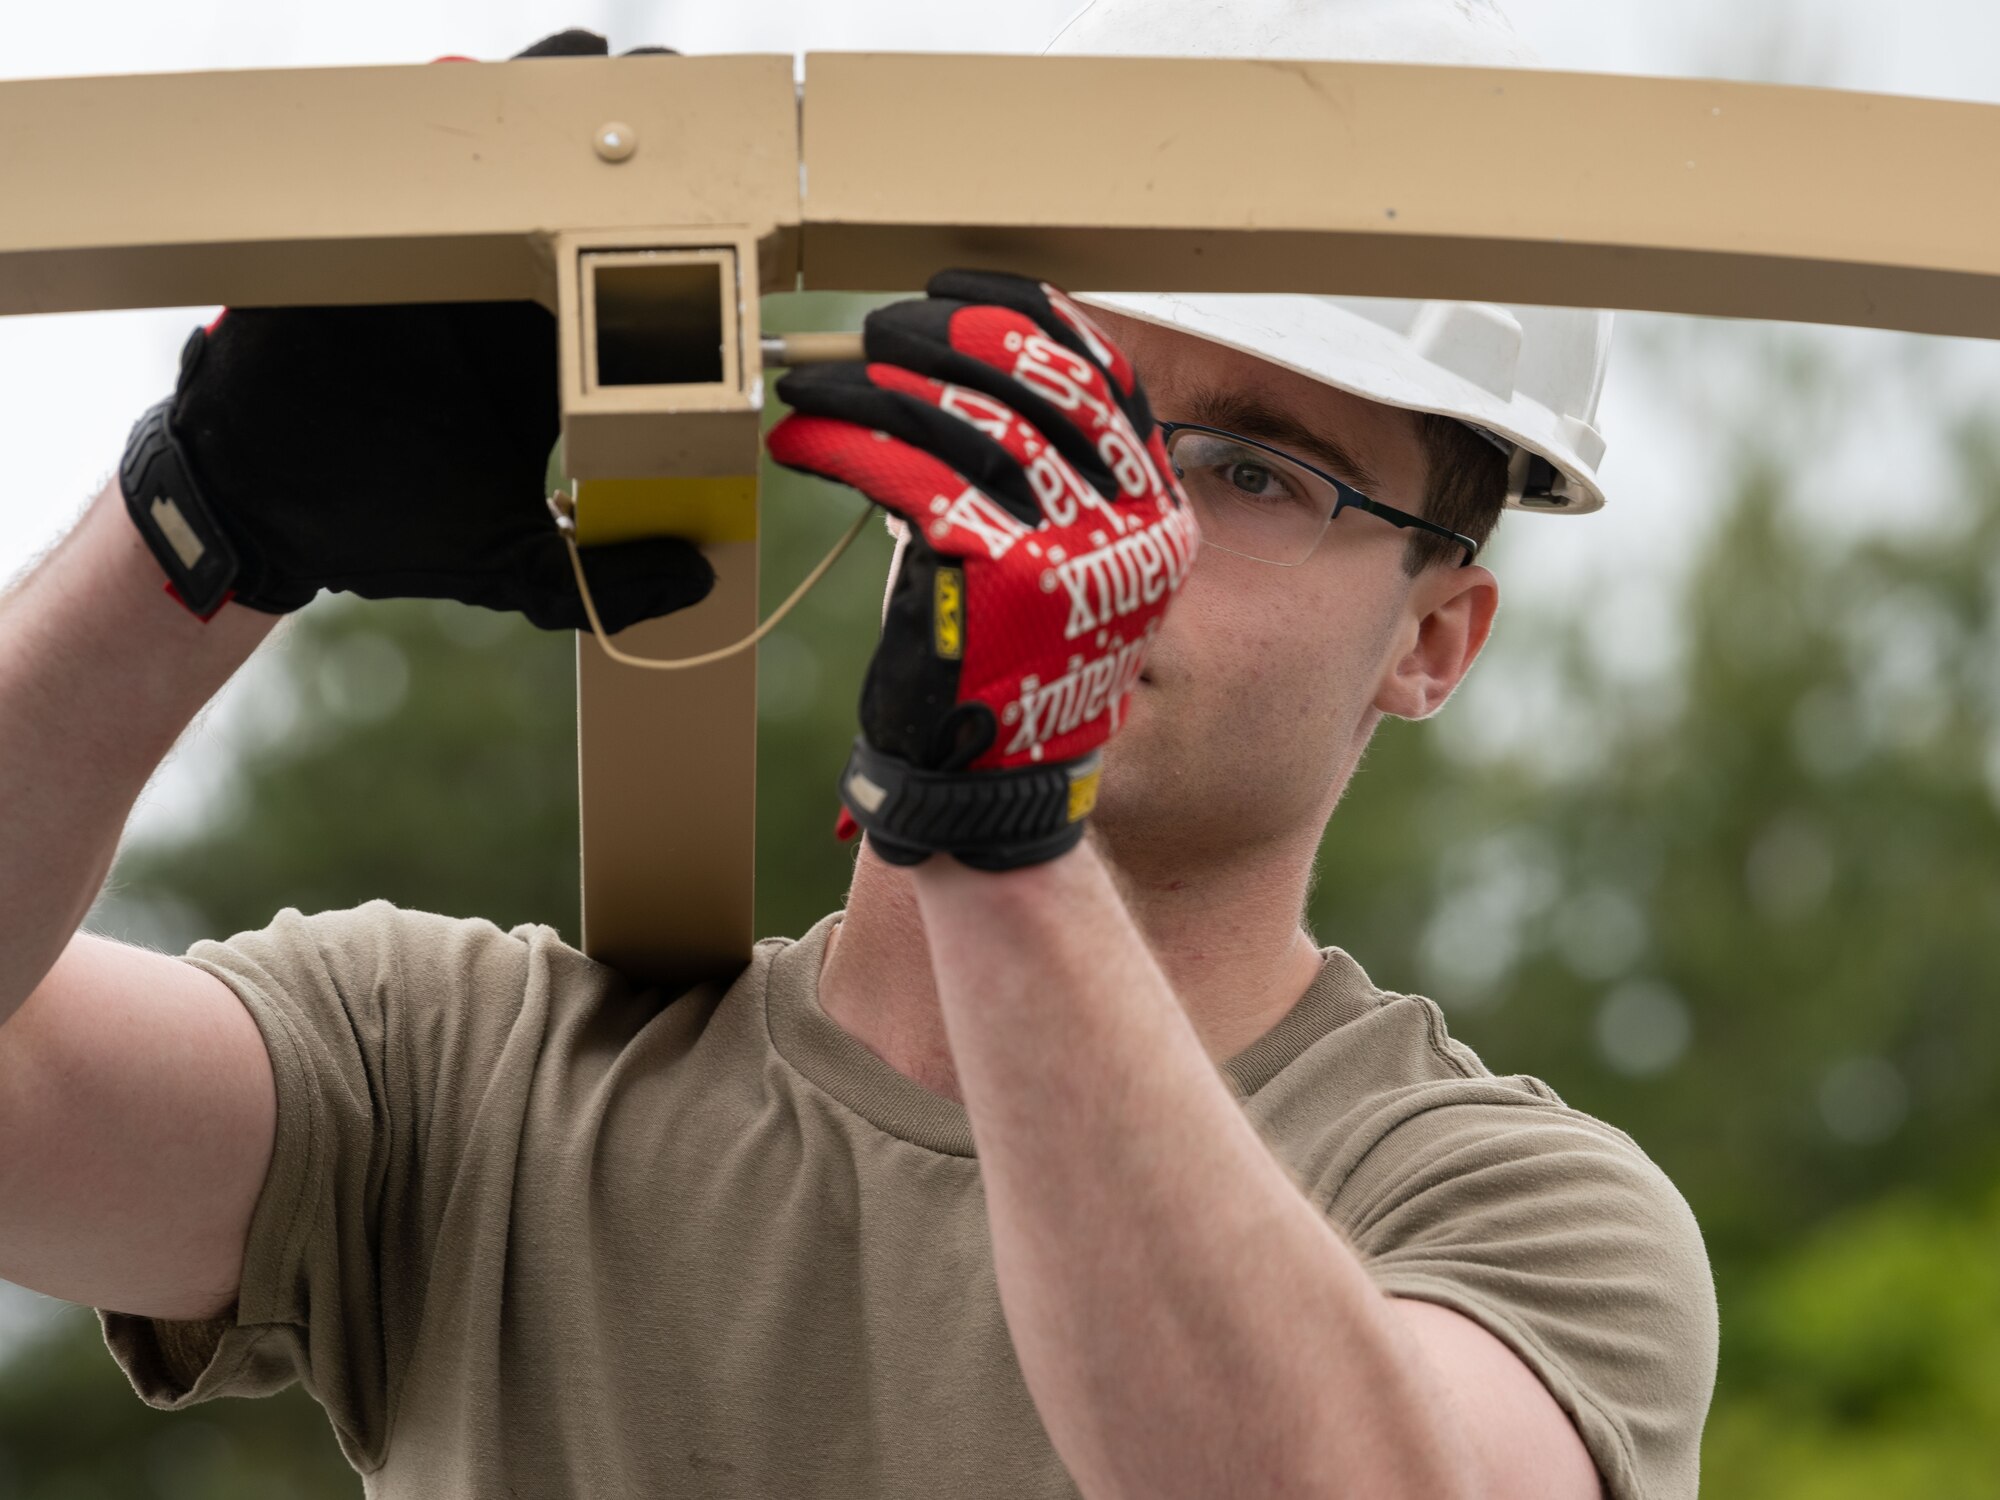 U.S. Airman 1st Class Ryan Gray, 35th Civil Engineer Squadron structures journeyman, places a pin to connect and lock a Disaster Relief Beddown System tent during the annual Prime Base Engineer Emergency Force (Prime BEEF) training at Misawa Air Base, Japan, June 14, 2022.